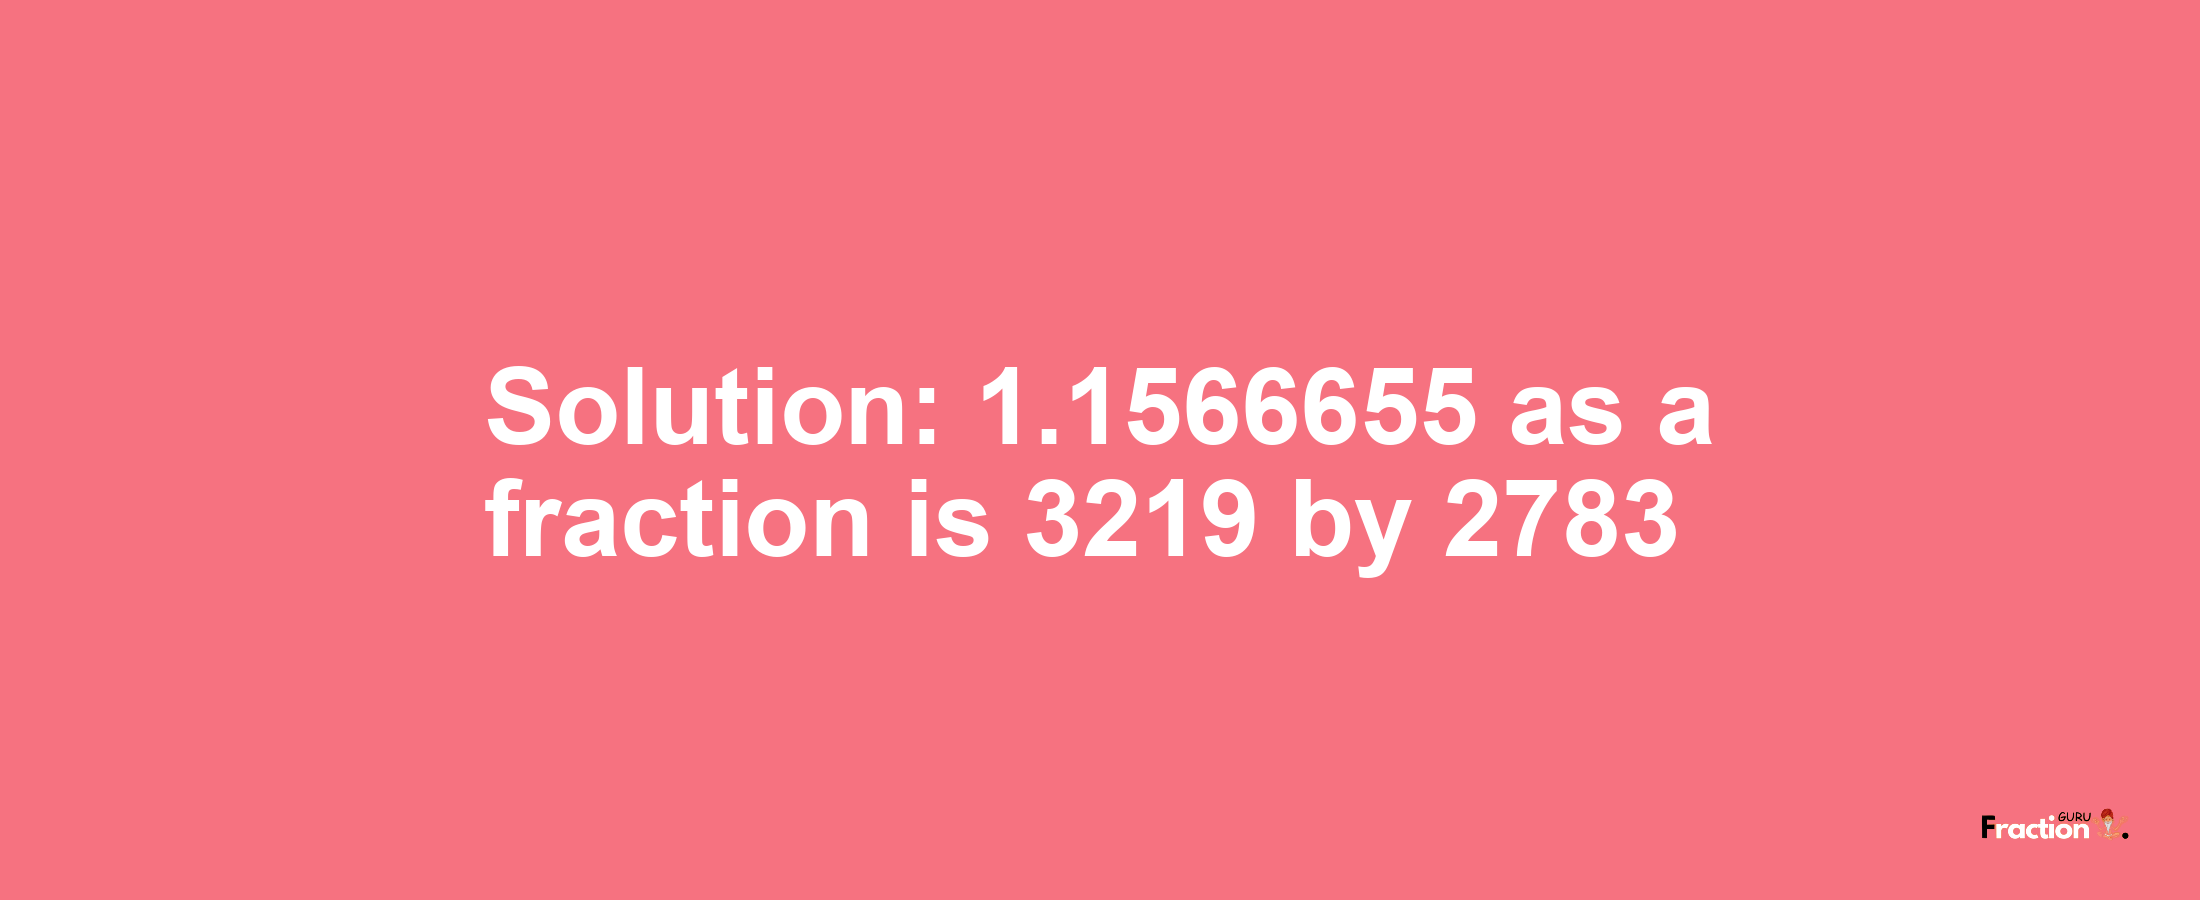 Solution:1.1566655 as a fraction is 3219/2783